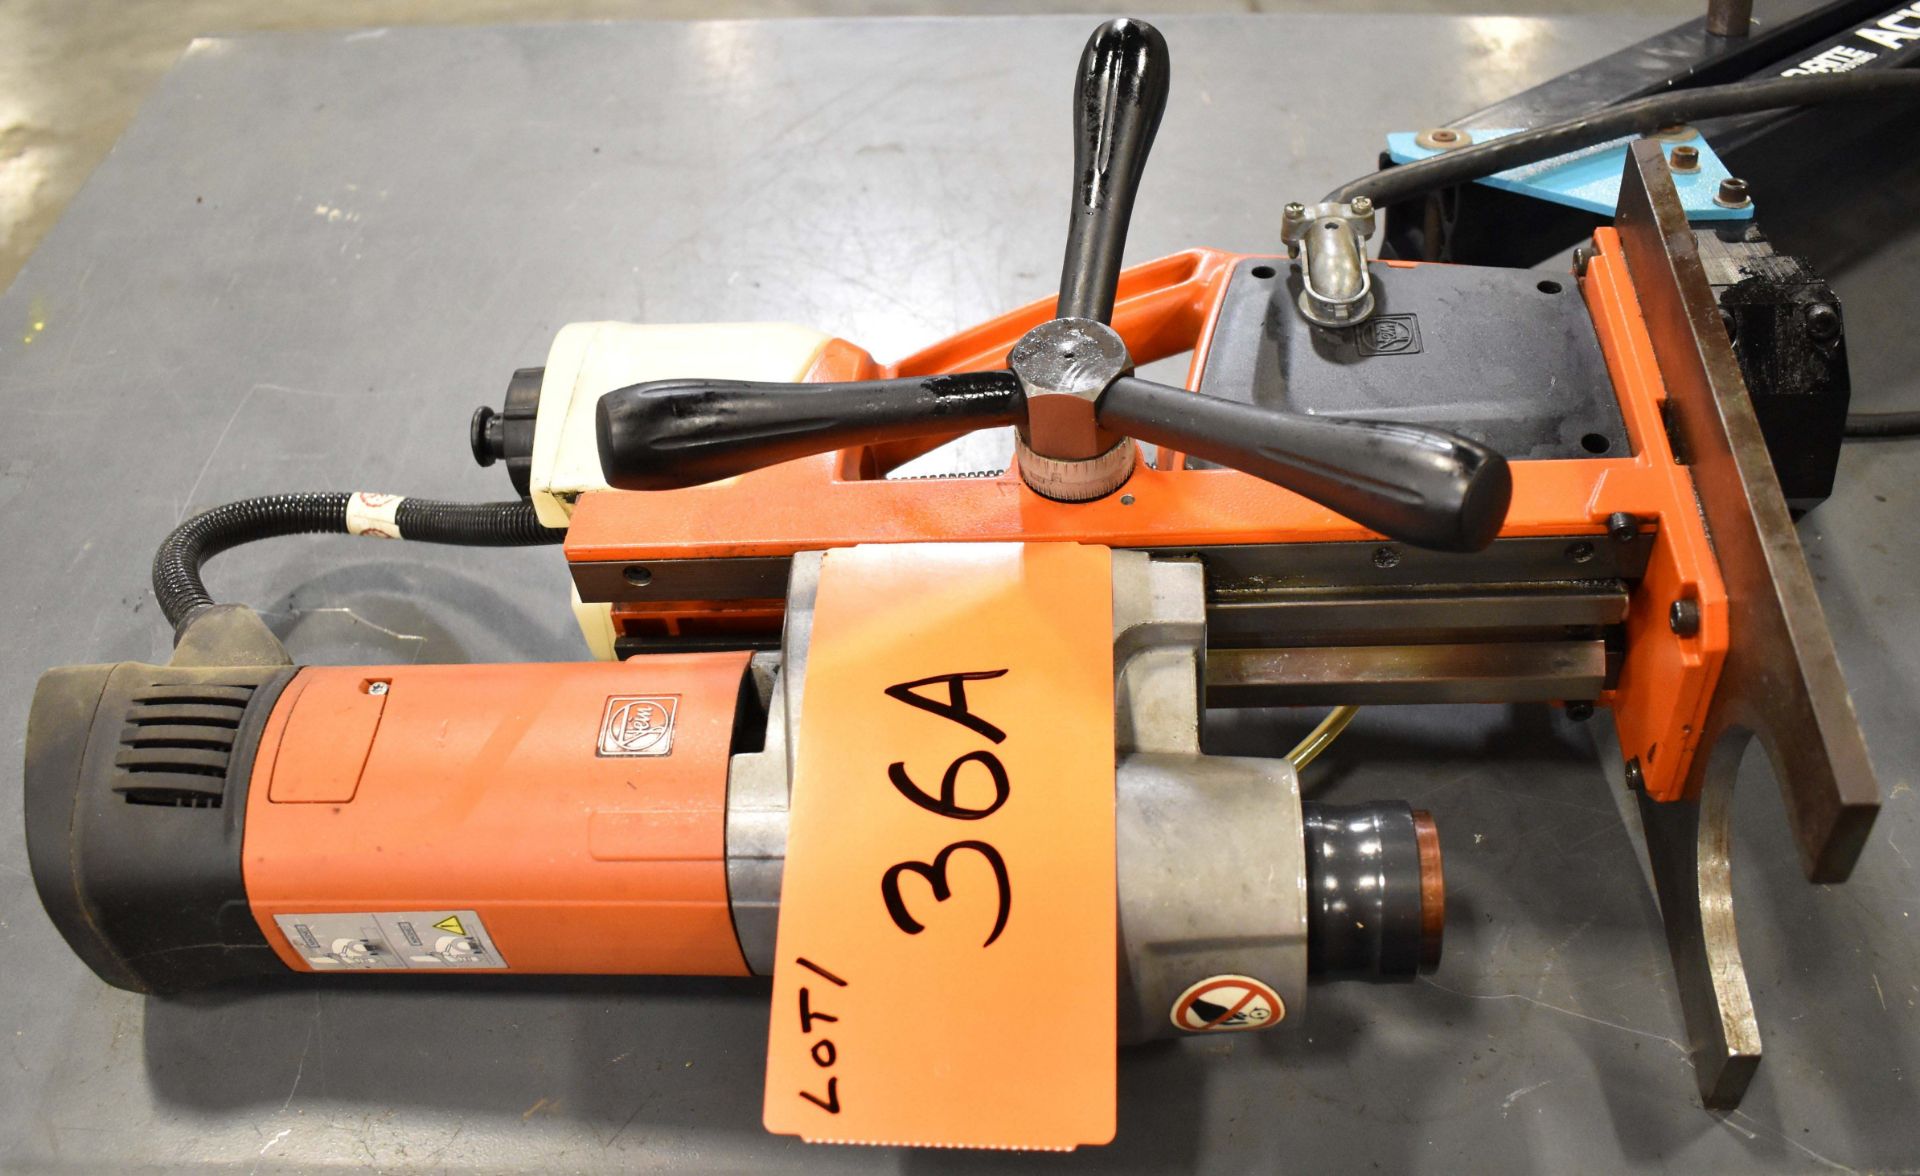 JEIN MAG BASE DRILL WITH TAP-RITE AC1050HD TAPPING ARM [RIGGING FEES FOR LOT #36 A - $25 USD PLUS - Image 2 of 3